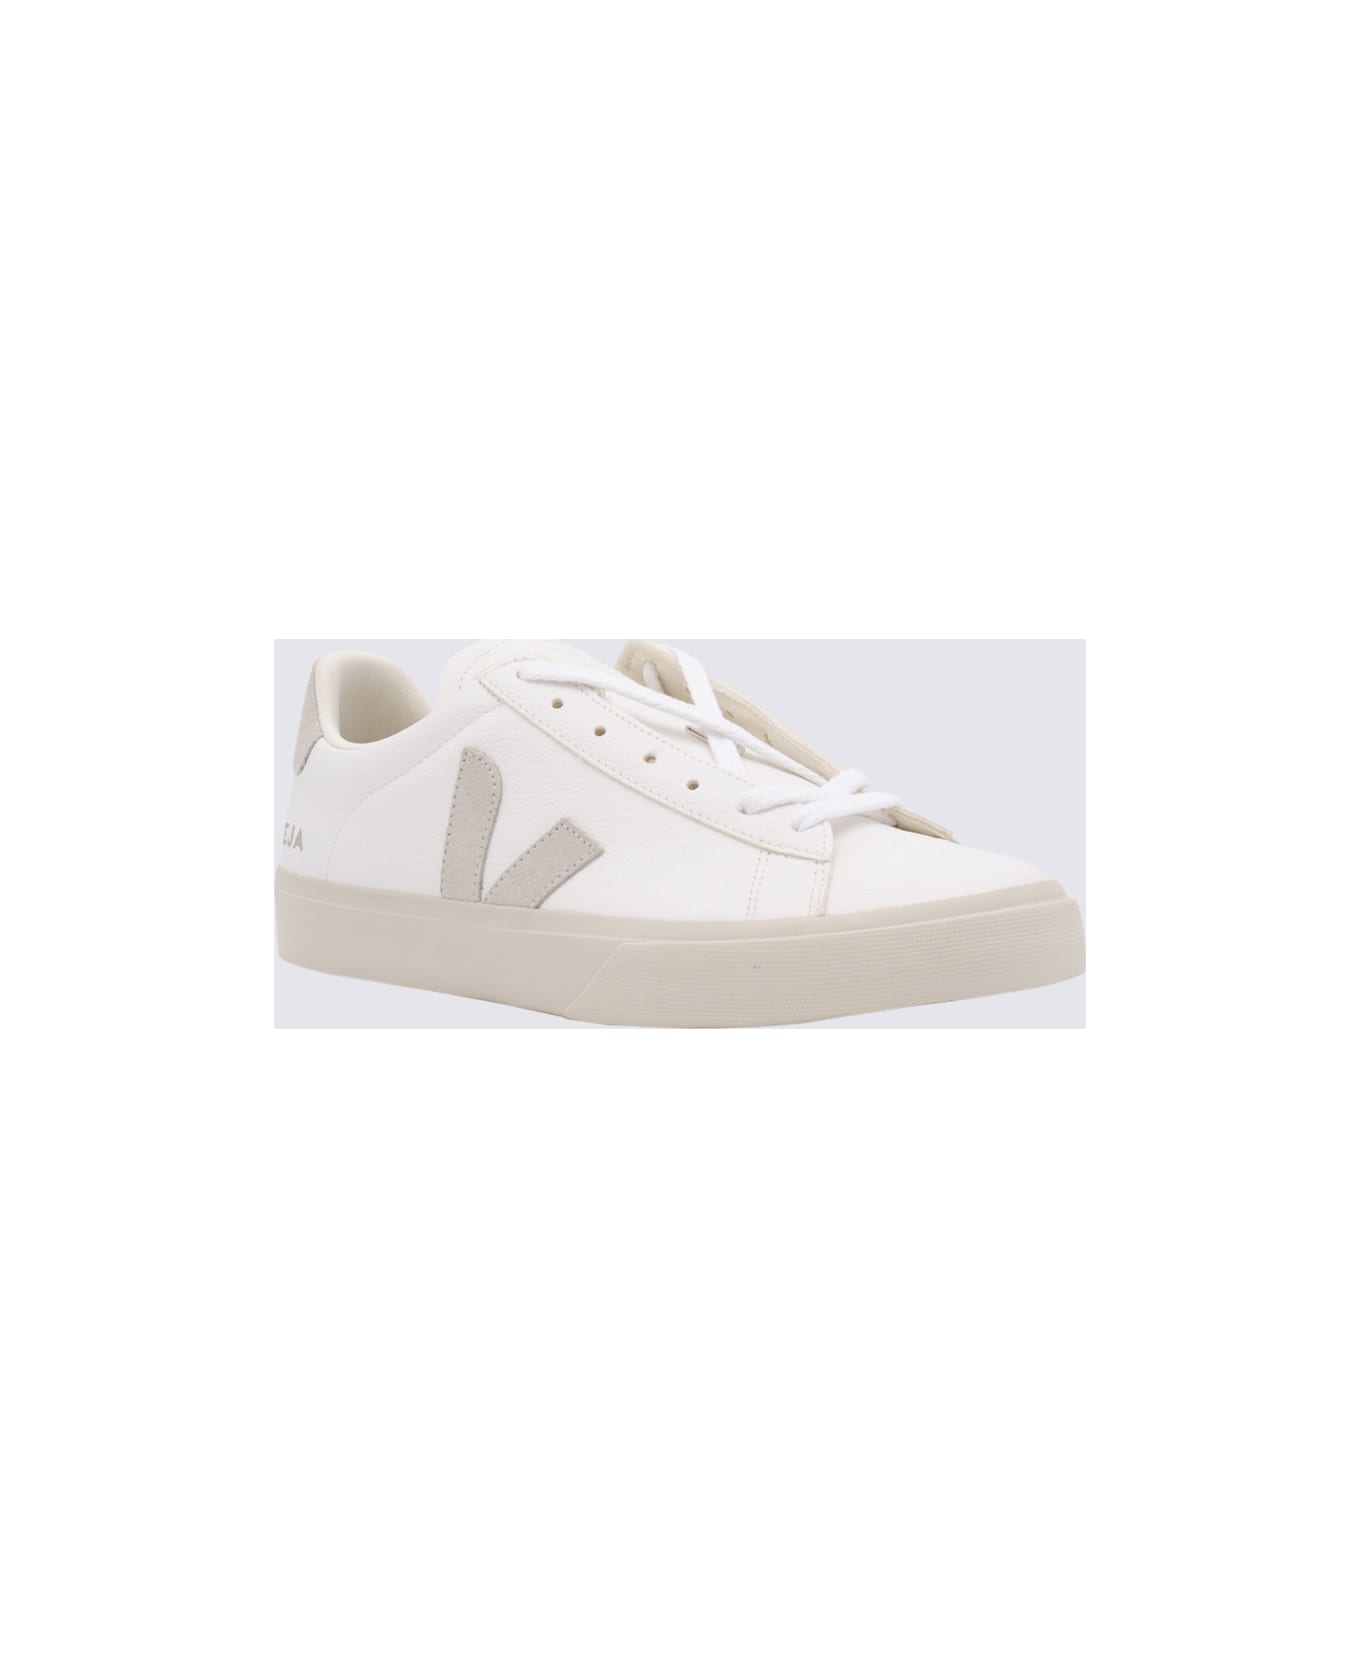 Veja White And Beige Faux Leather Campo Sneakers - EXTRA-WHITE_NATURAL-SUEDE